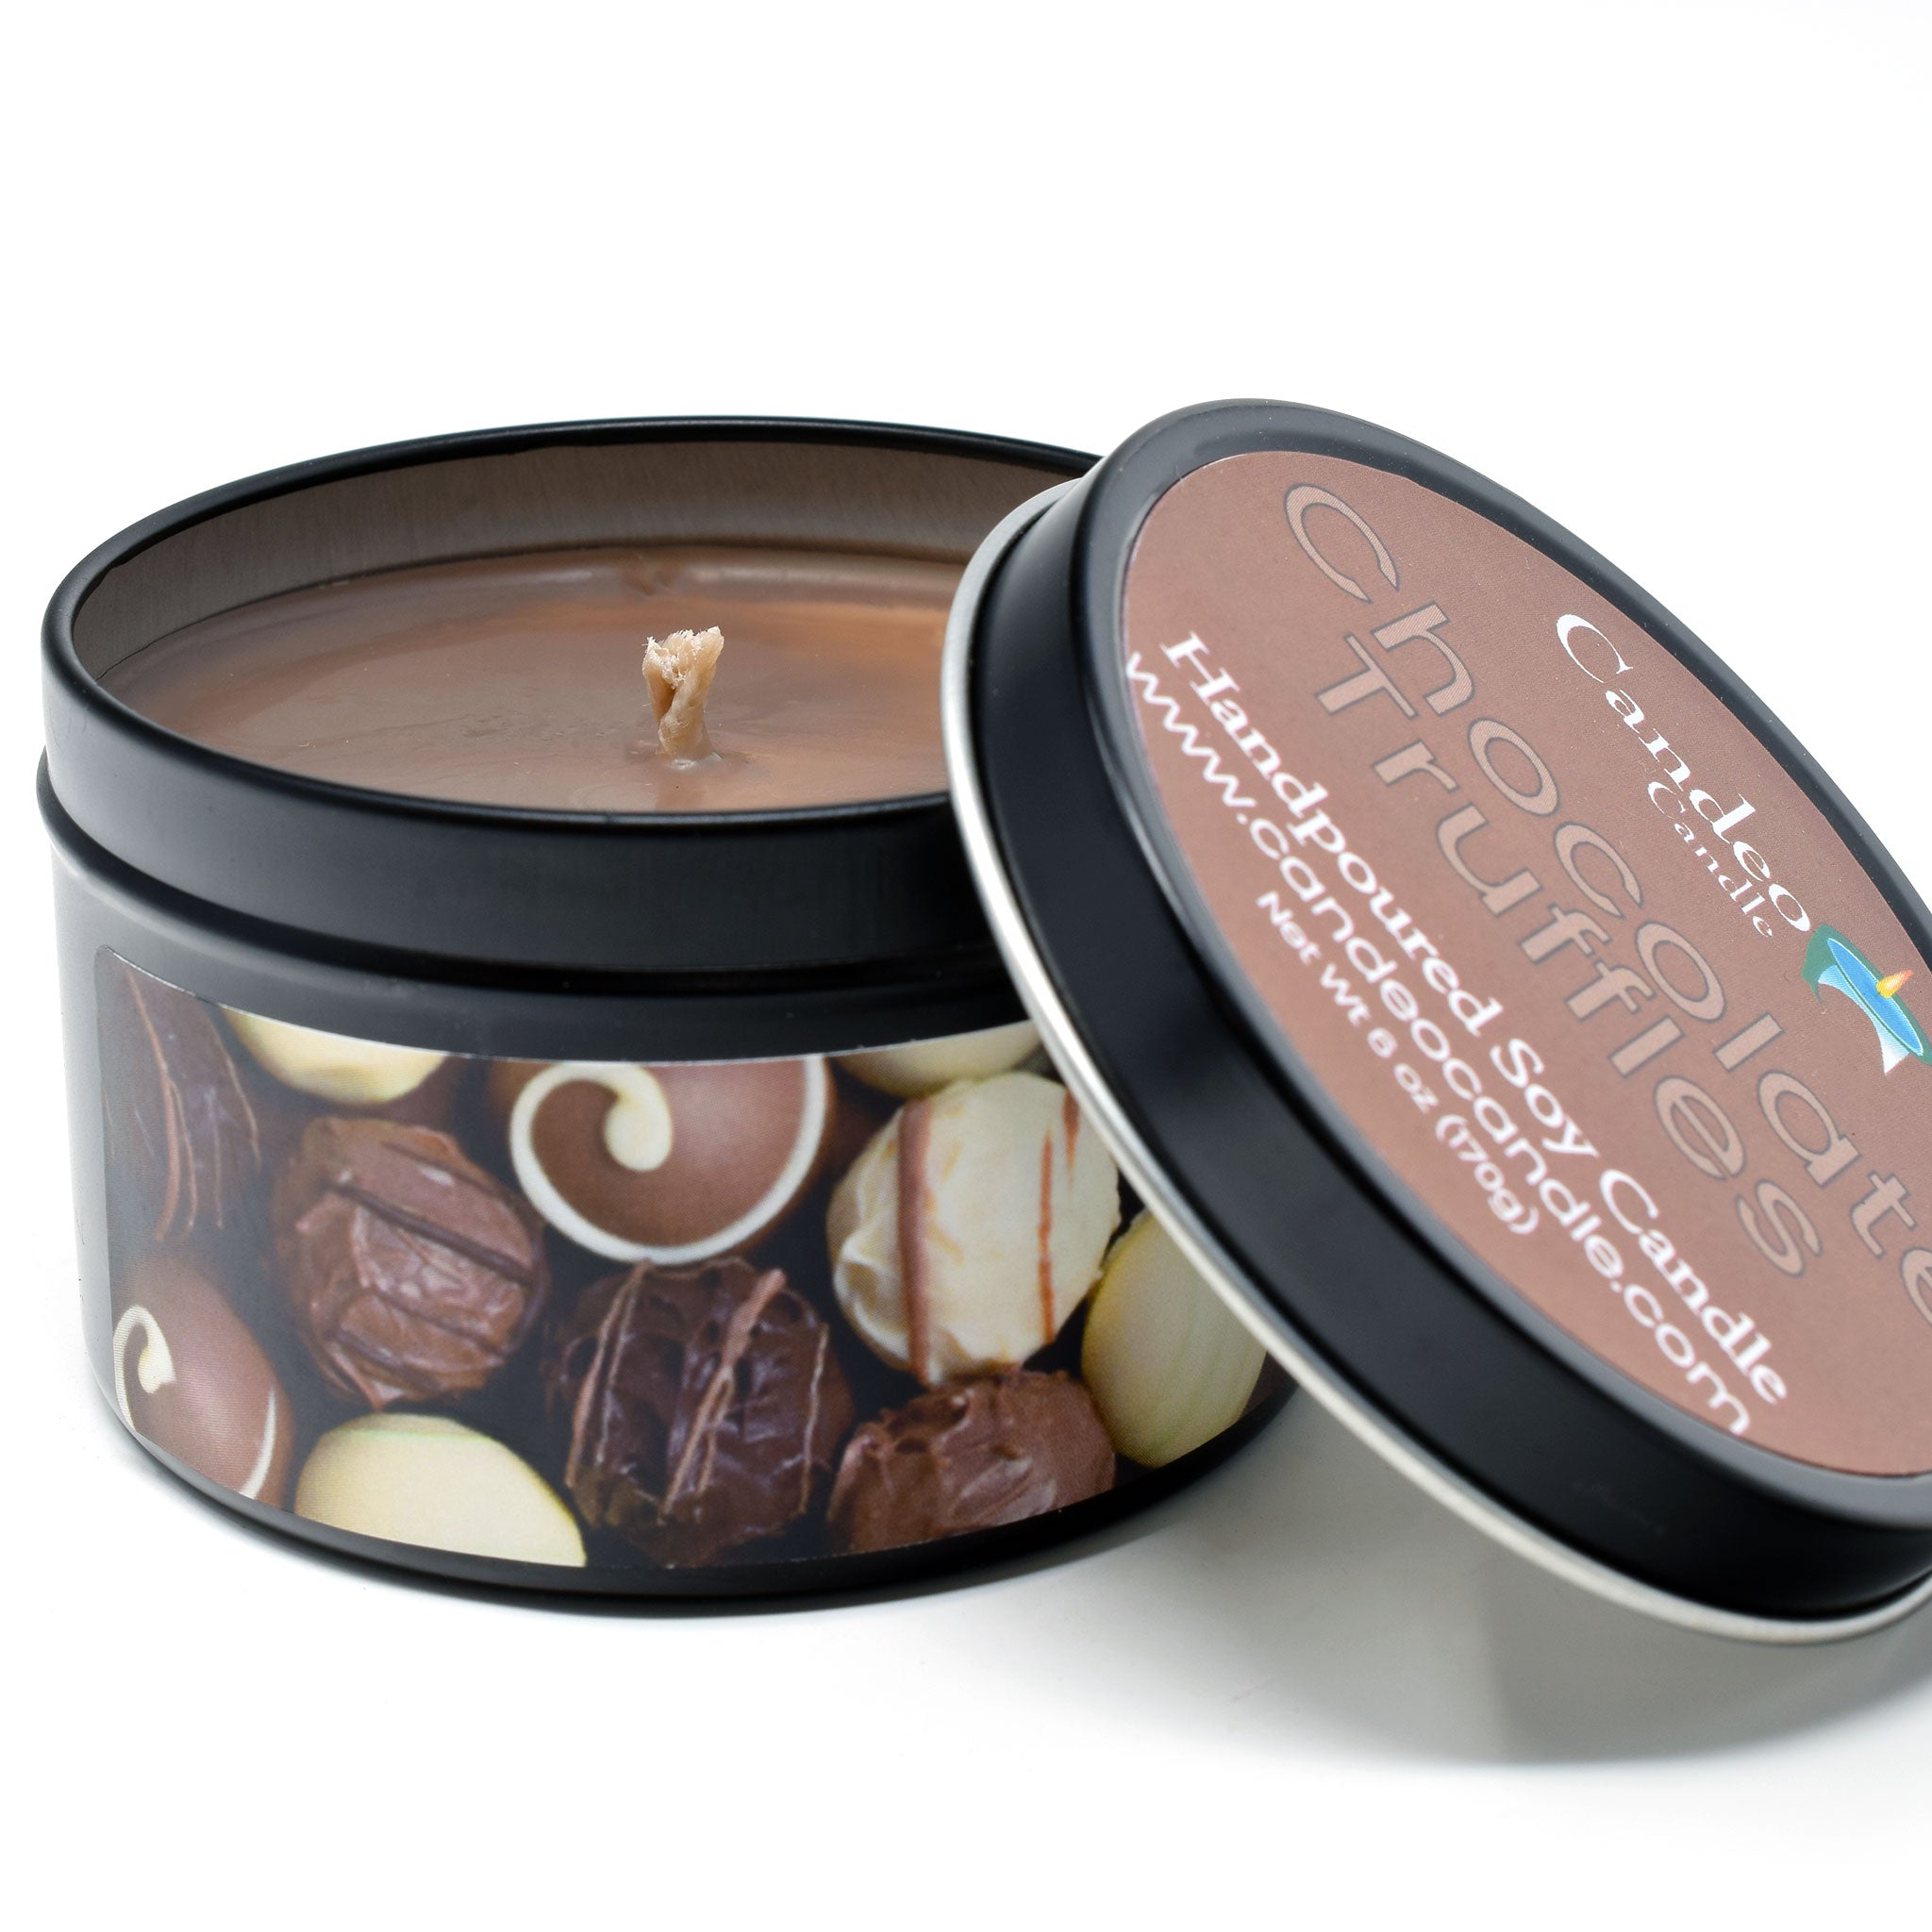 Chocolate Truffles, 6oz Soy Candle Tin - Candeo Candle